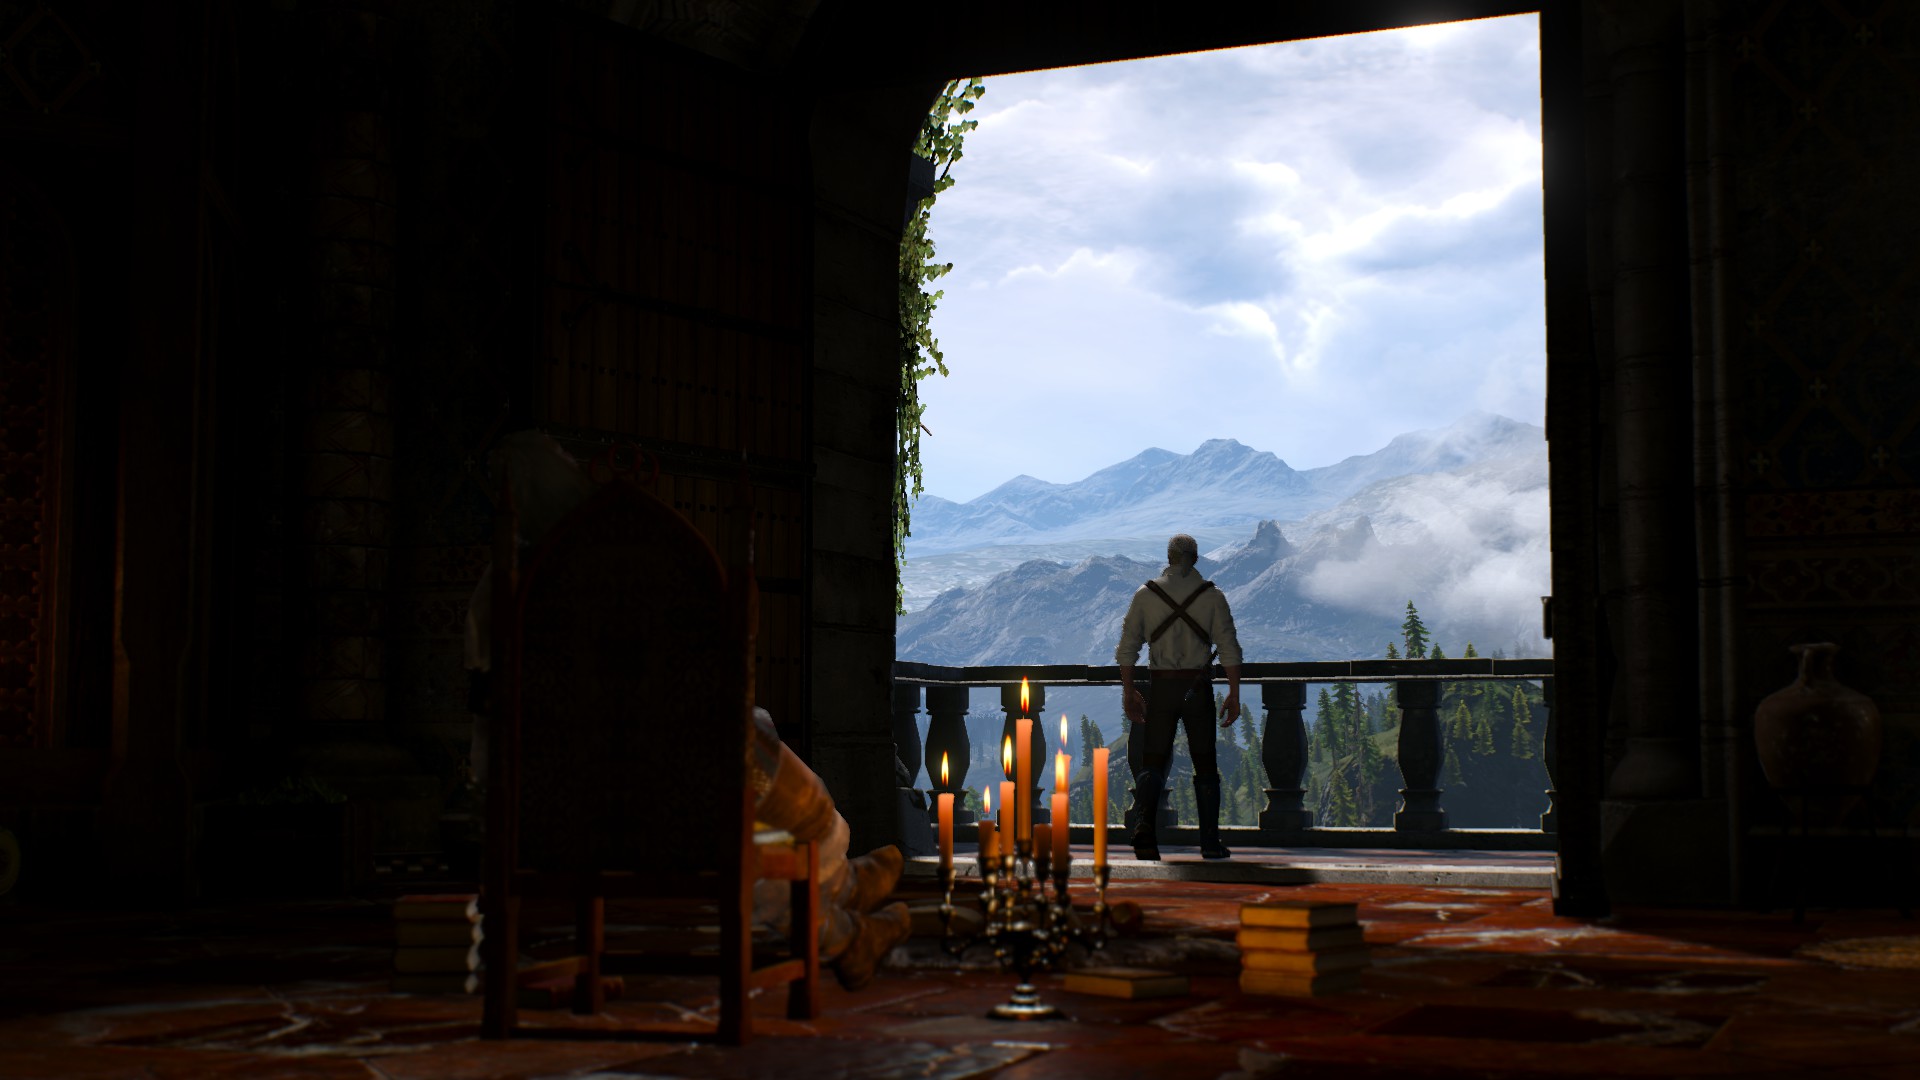 Geralt Of Rivia The Witcher 3 Wild Hunt The Witcher Kaer Morhen 1920x1080